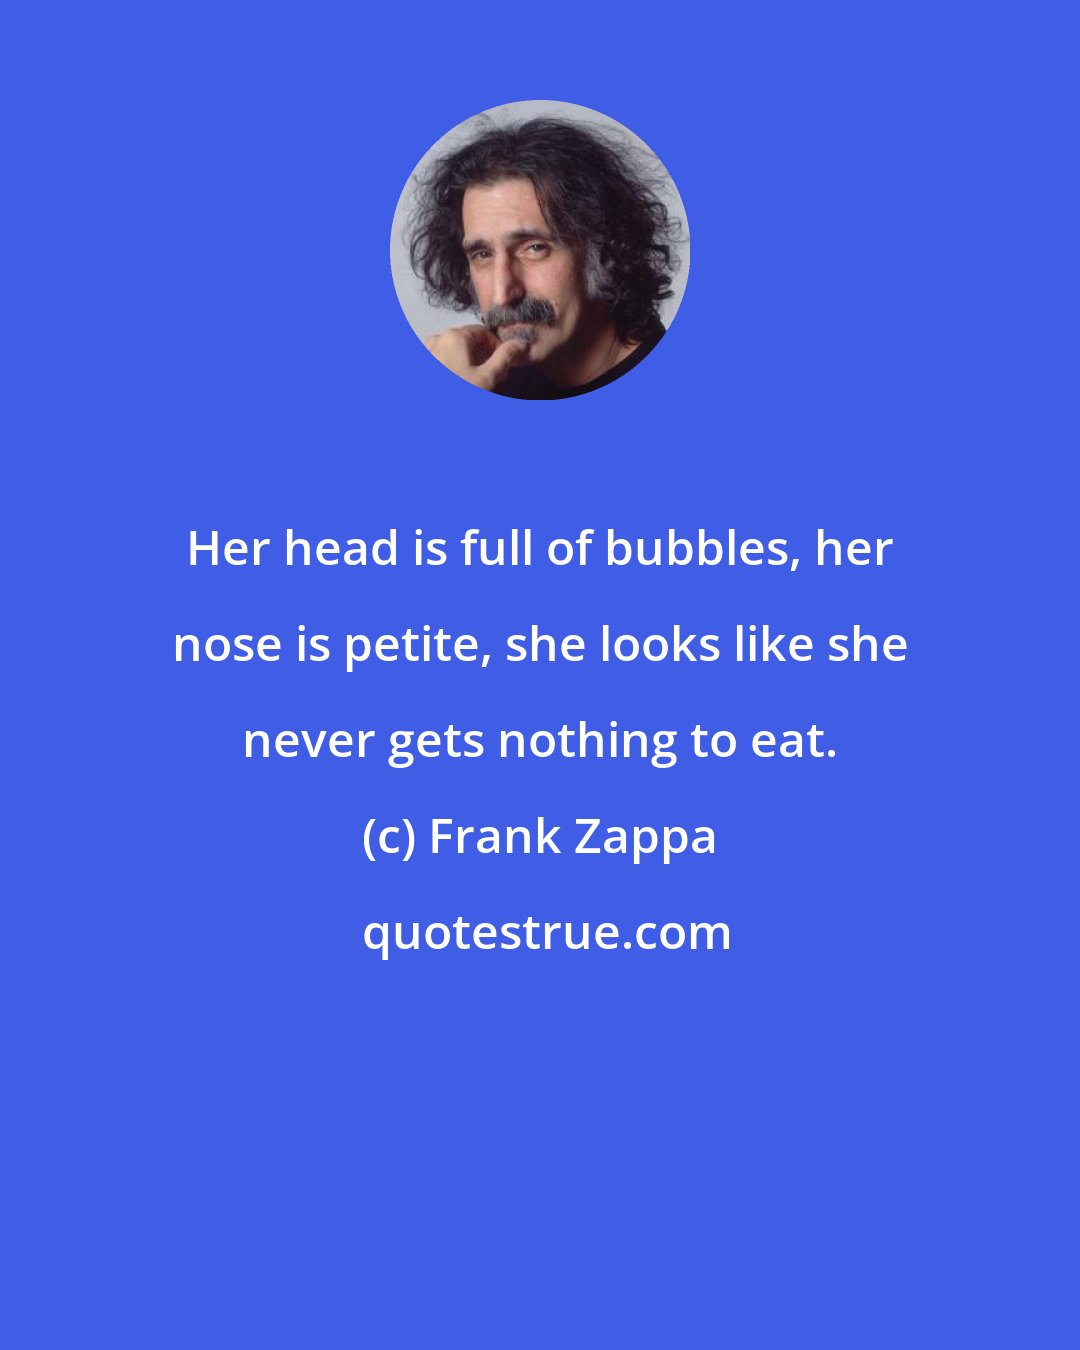 Frank Zappa: Her head is full of bubbles, her nose is petite, she looks like she never gets nothing to eat.